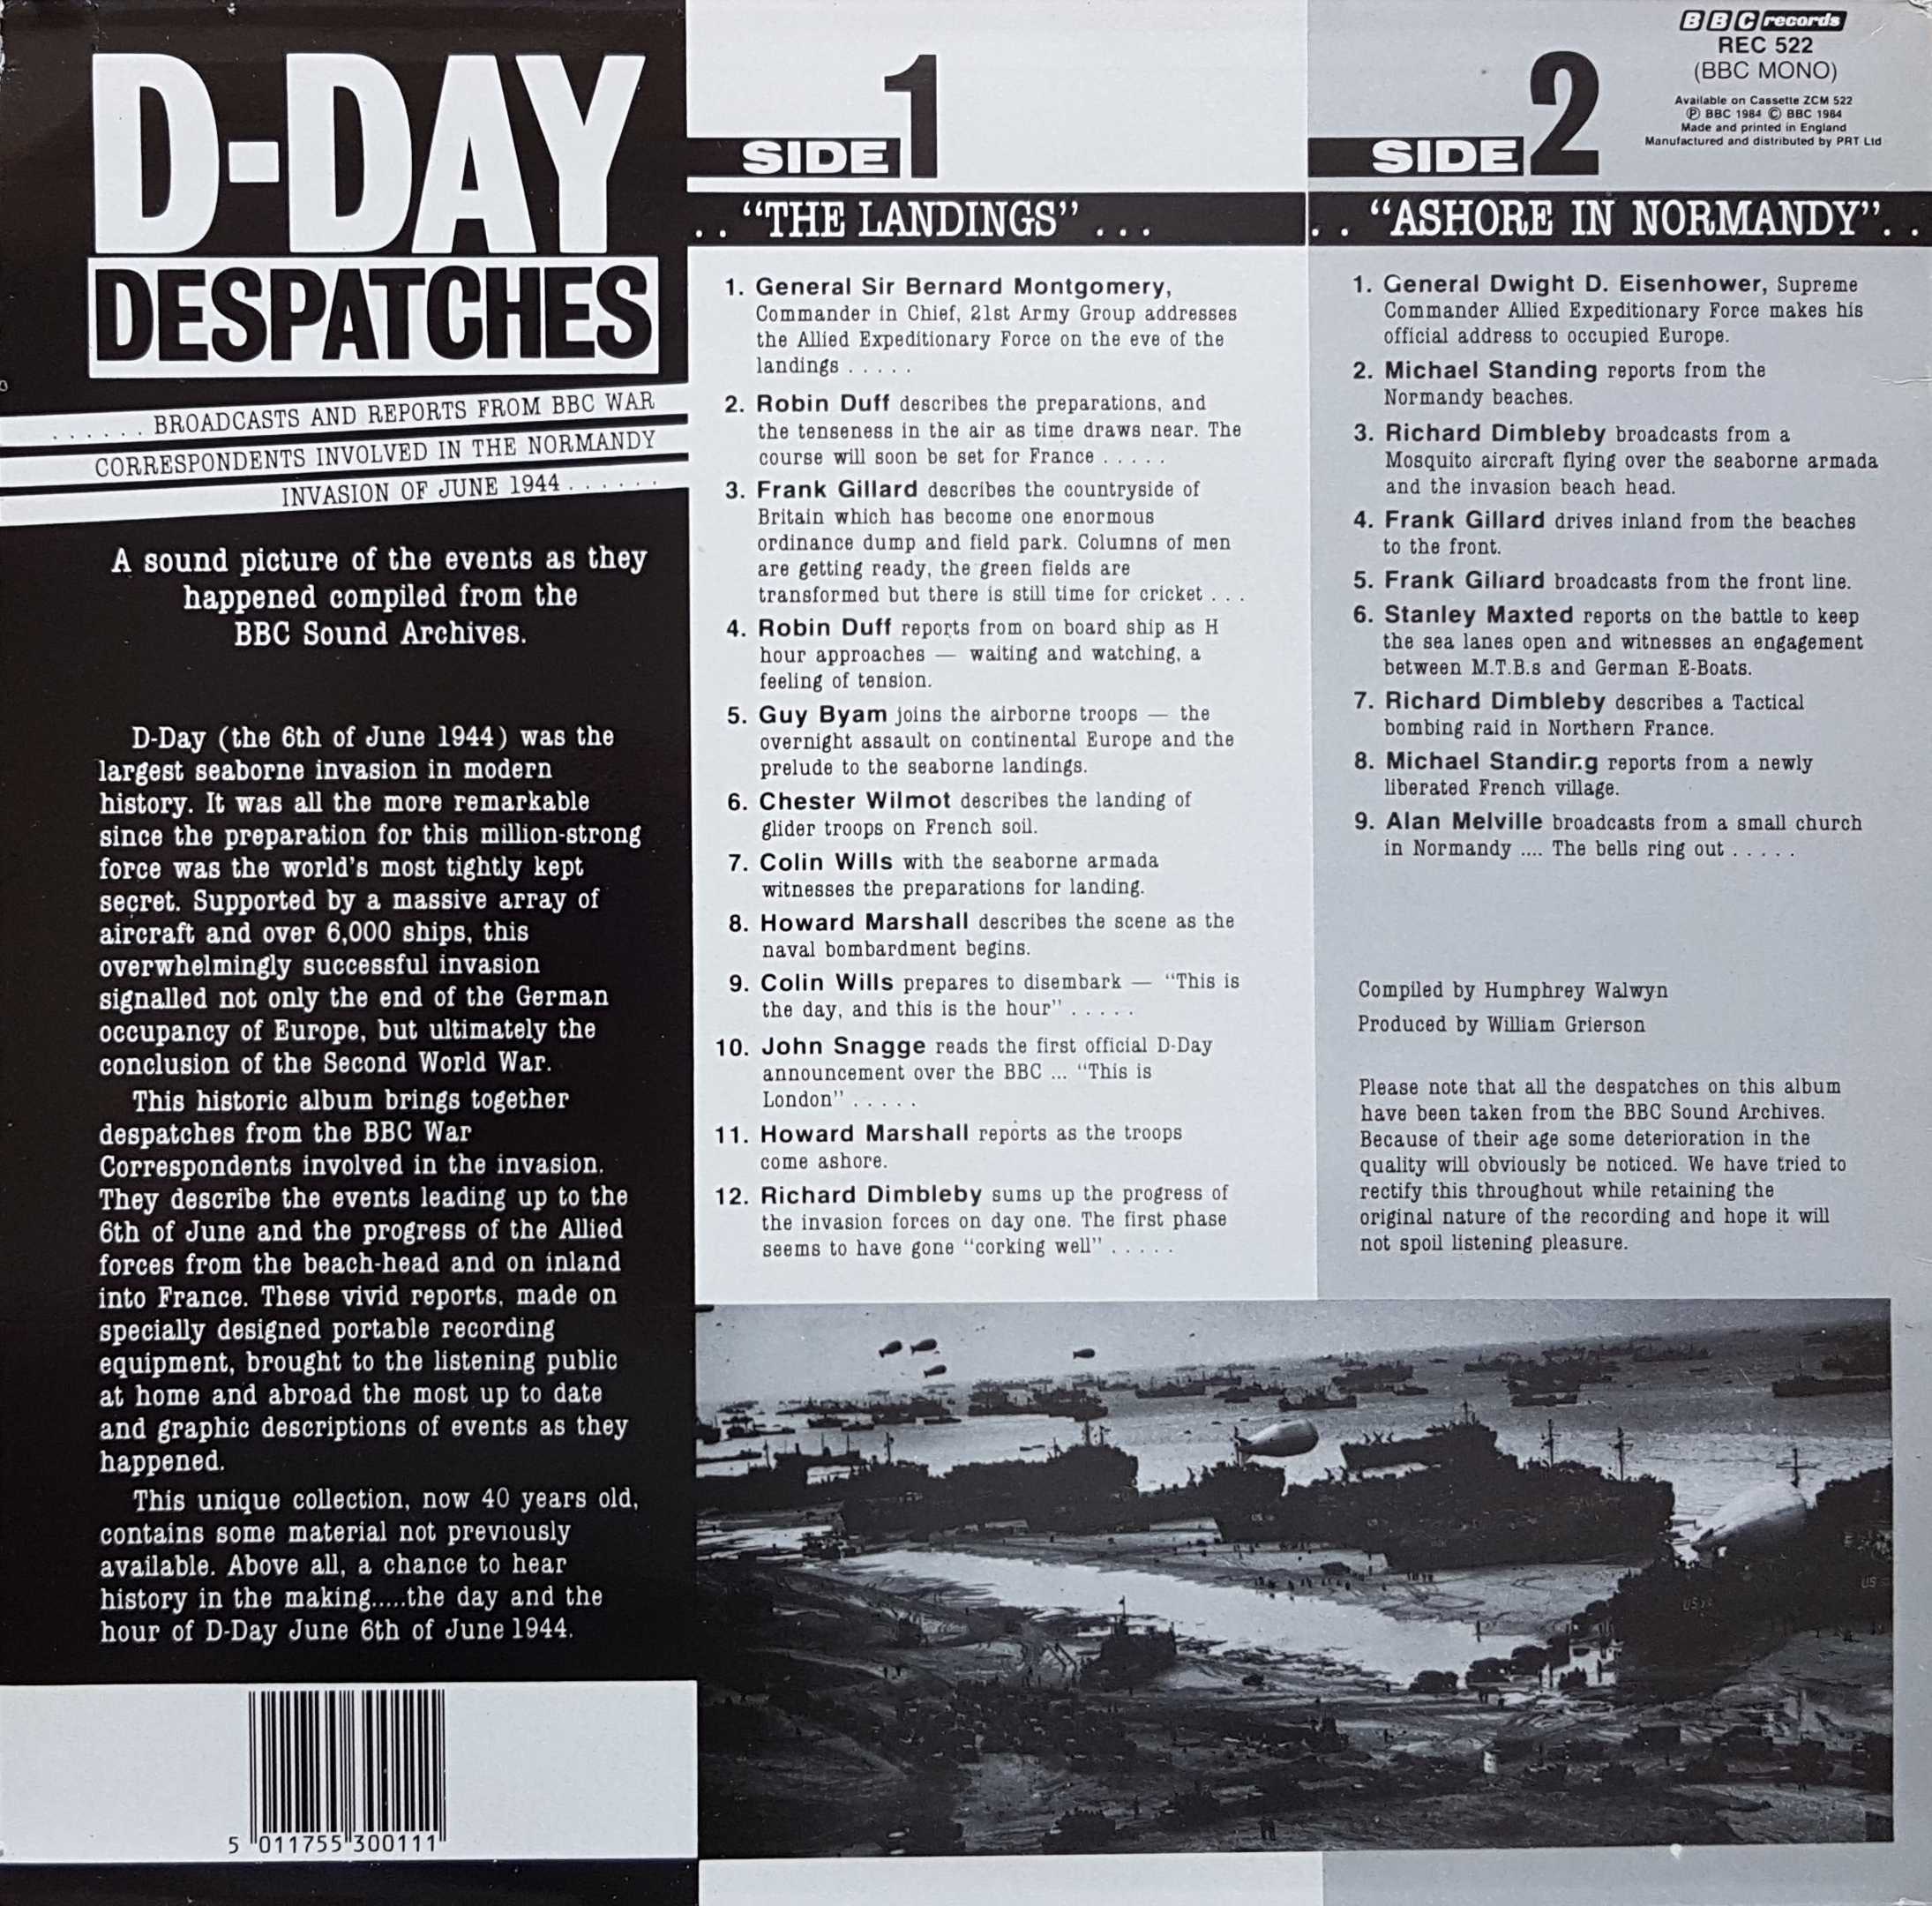 Picture of REC 522 D-day despatches by artist Various from the BBC records and Tapes library